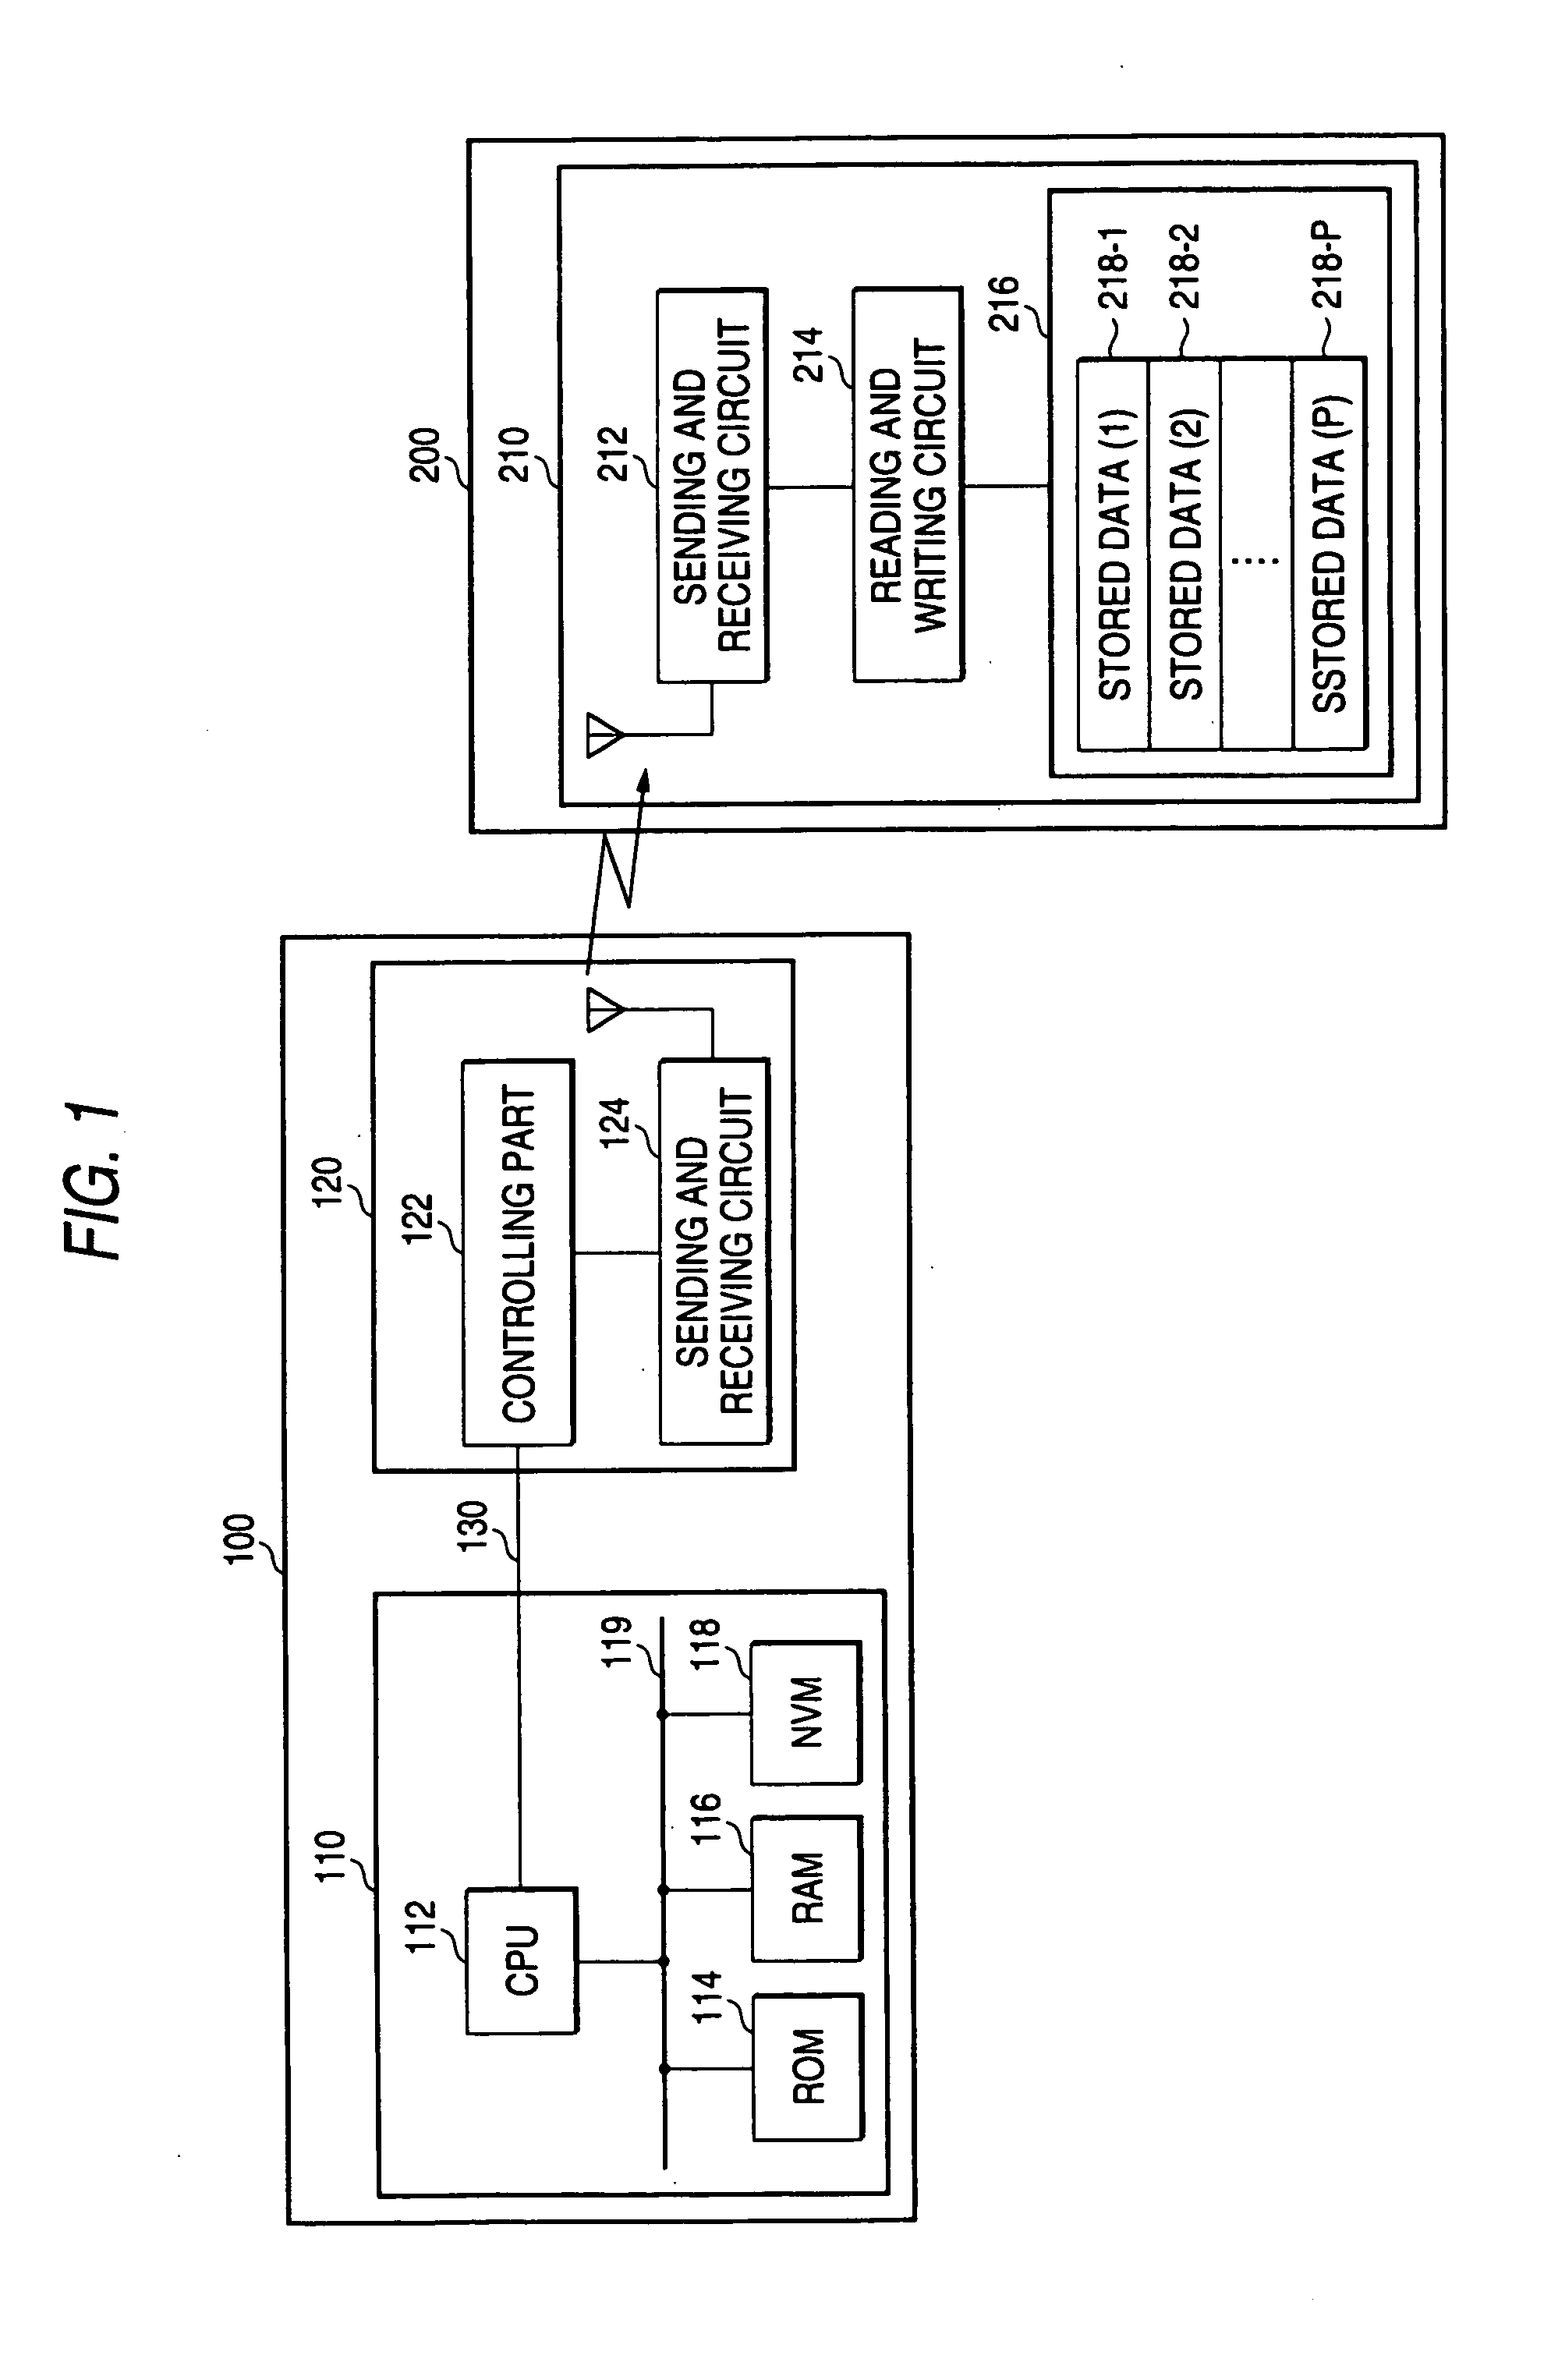 Image forming apparatus, method for controlling writing data from the same to storage device, method for controlling reading data from storage device to the same, and replacement part therefor